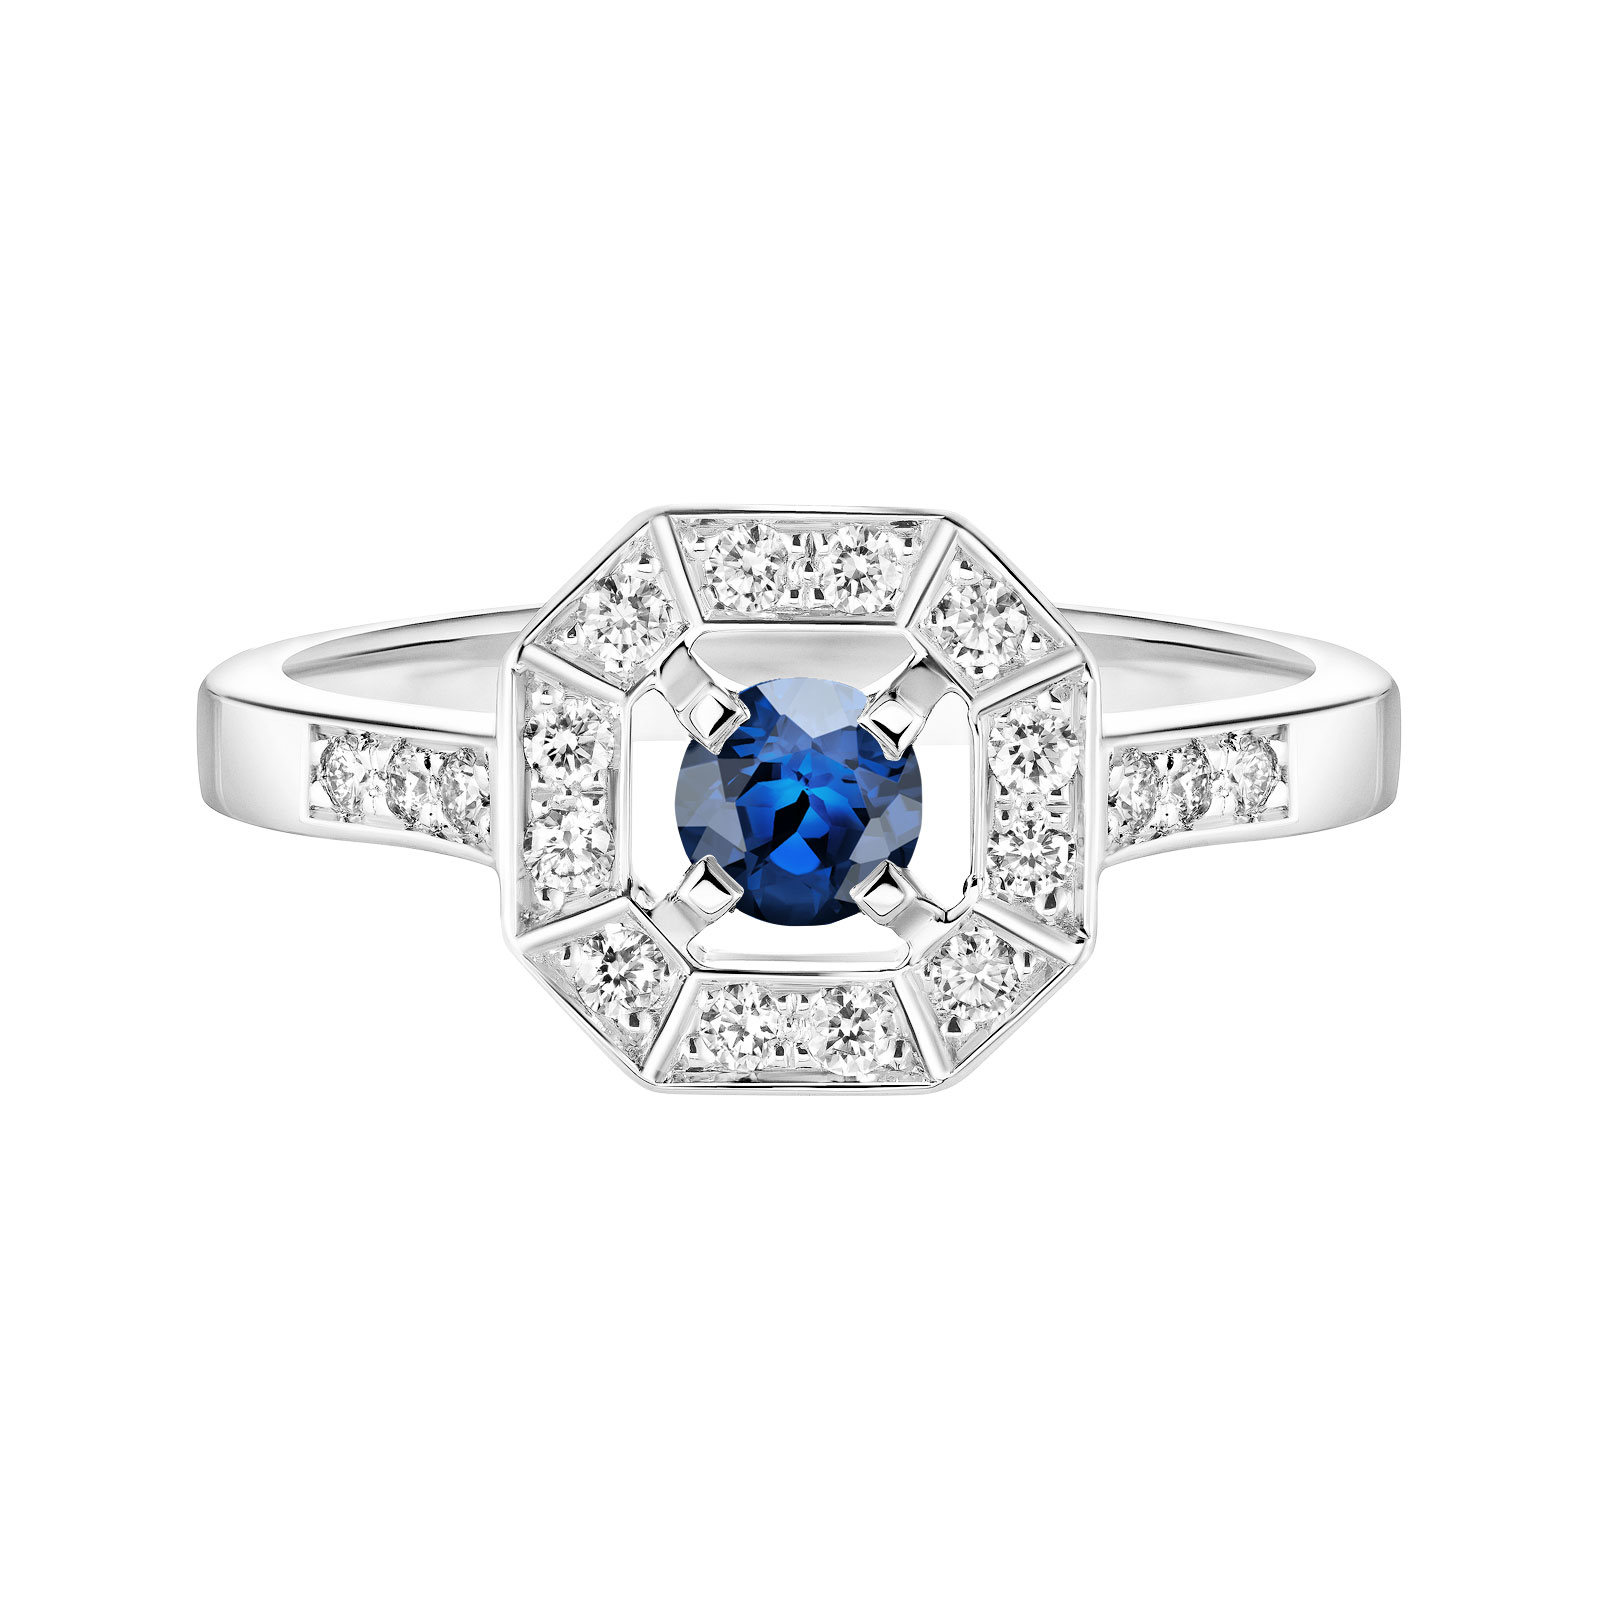 Ring White gold Sapphire and diamonds Art Déco Rond 4 mm 1